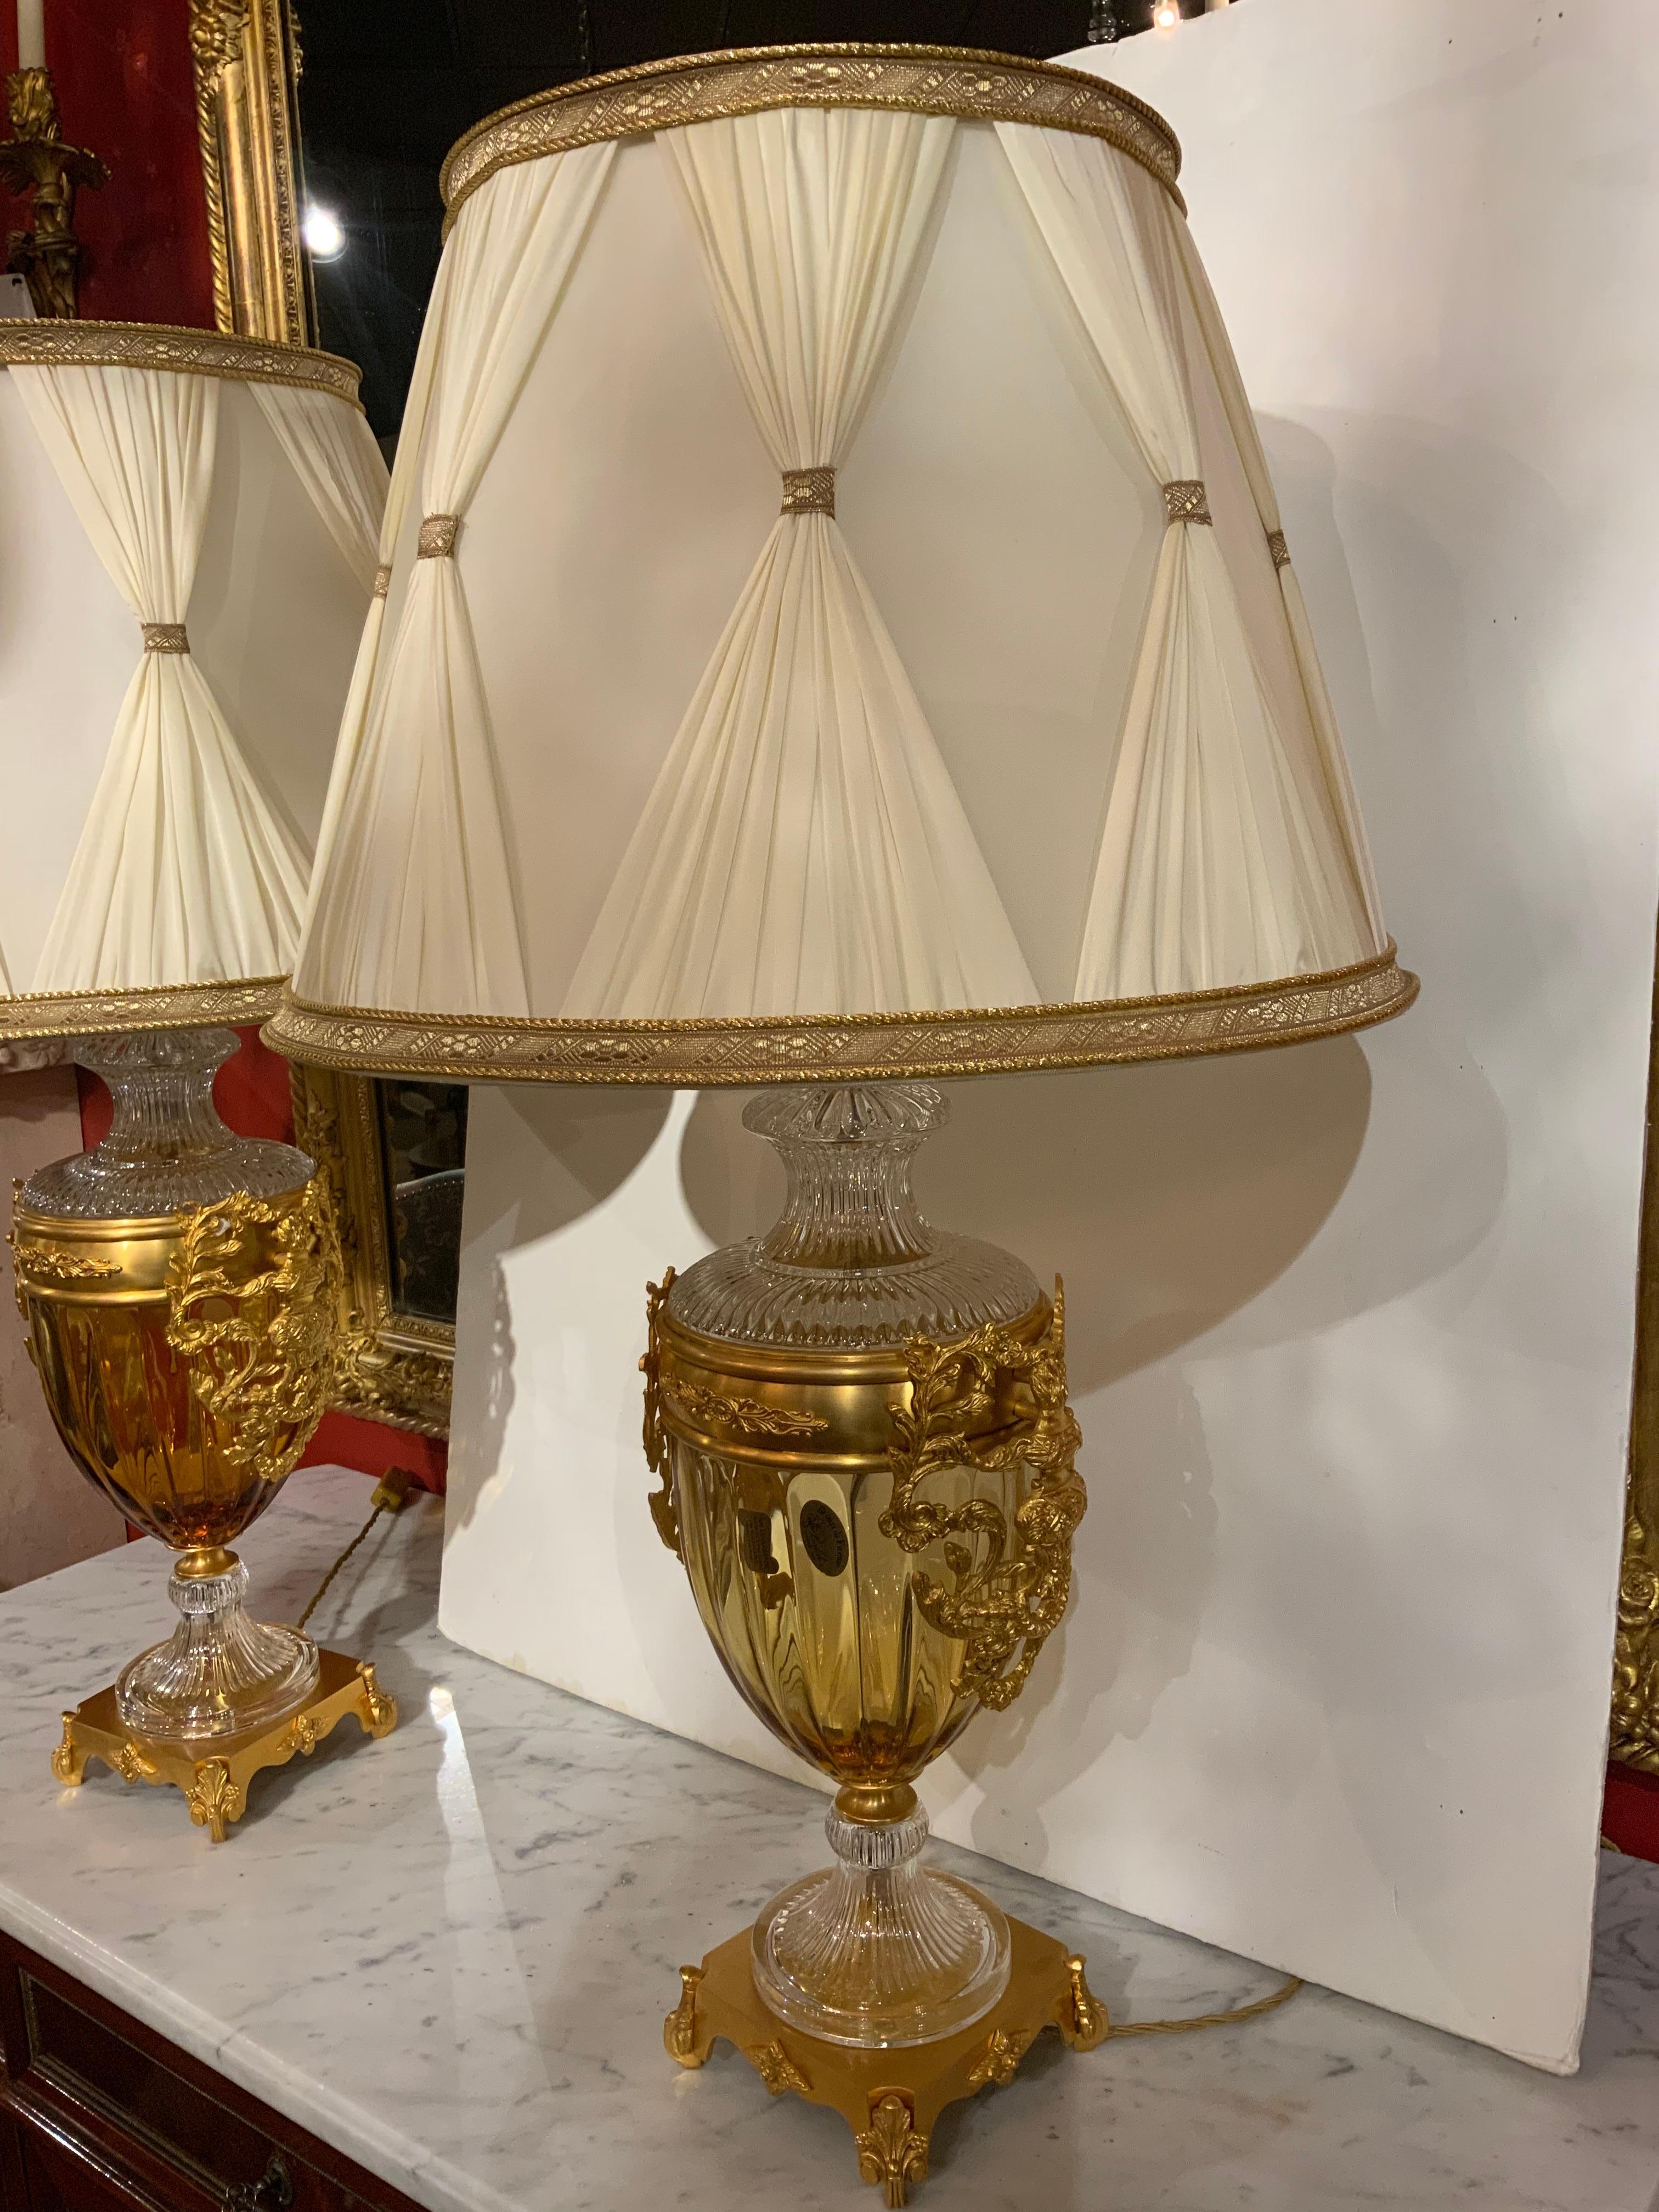 Pair of crystal and bronze dore lamps by manufacture 
Baldi that is known for their superior quality. The crystal 
Is 24 percent lead crystal and is on a bracket foot that
Supports the lamp. The crystal is a pale gold hue and
Is in an urn shape.